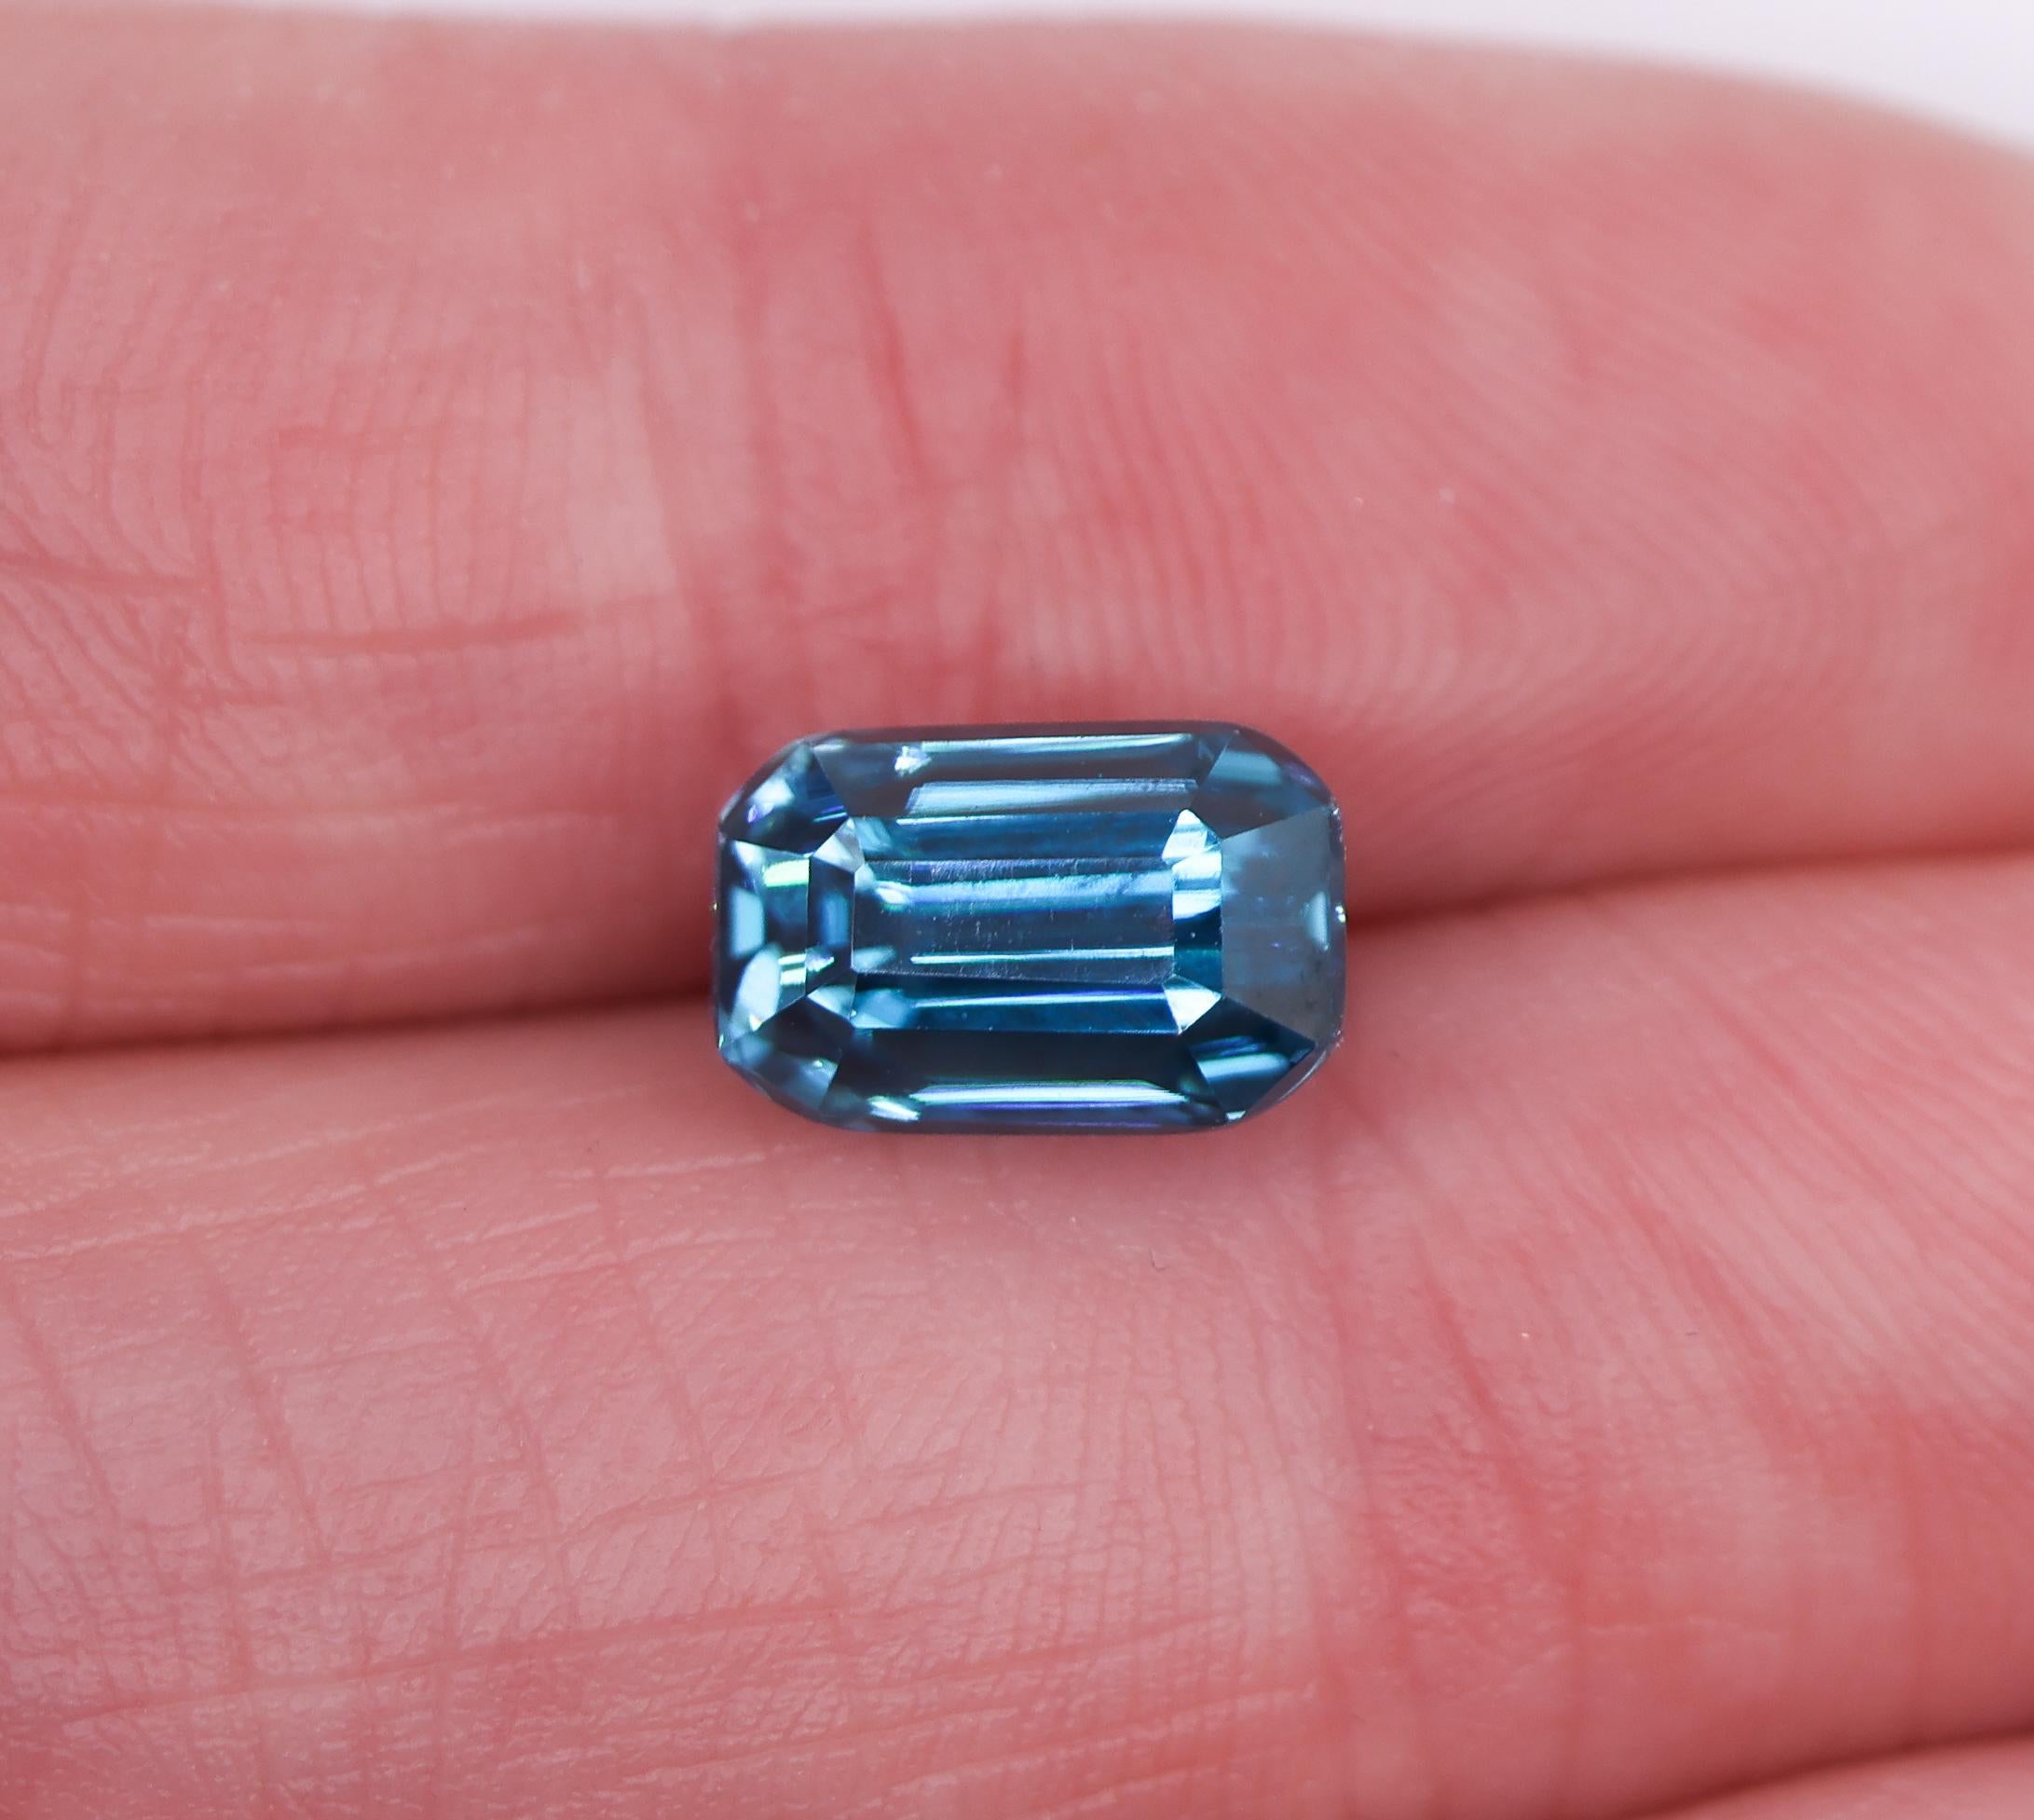 A gorgeous emerald cut blue zircon looking for it's next home. If you feel a sparkle of excitement seeing this gem and want to design a one of a kind piece of jewelry, let us know!

Cambodian Zircon is the perfect eco-friendly alternative to